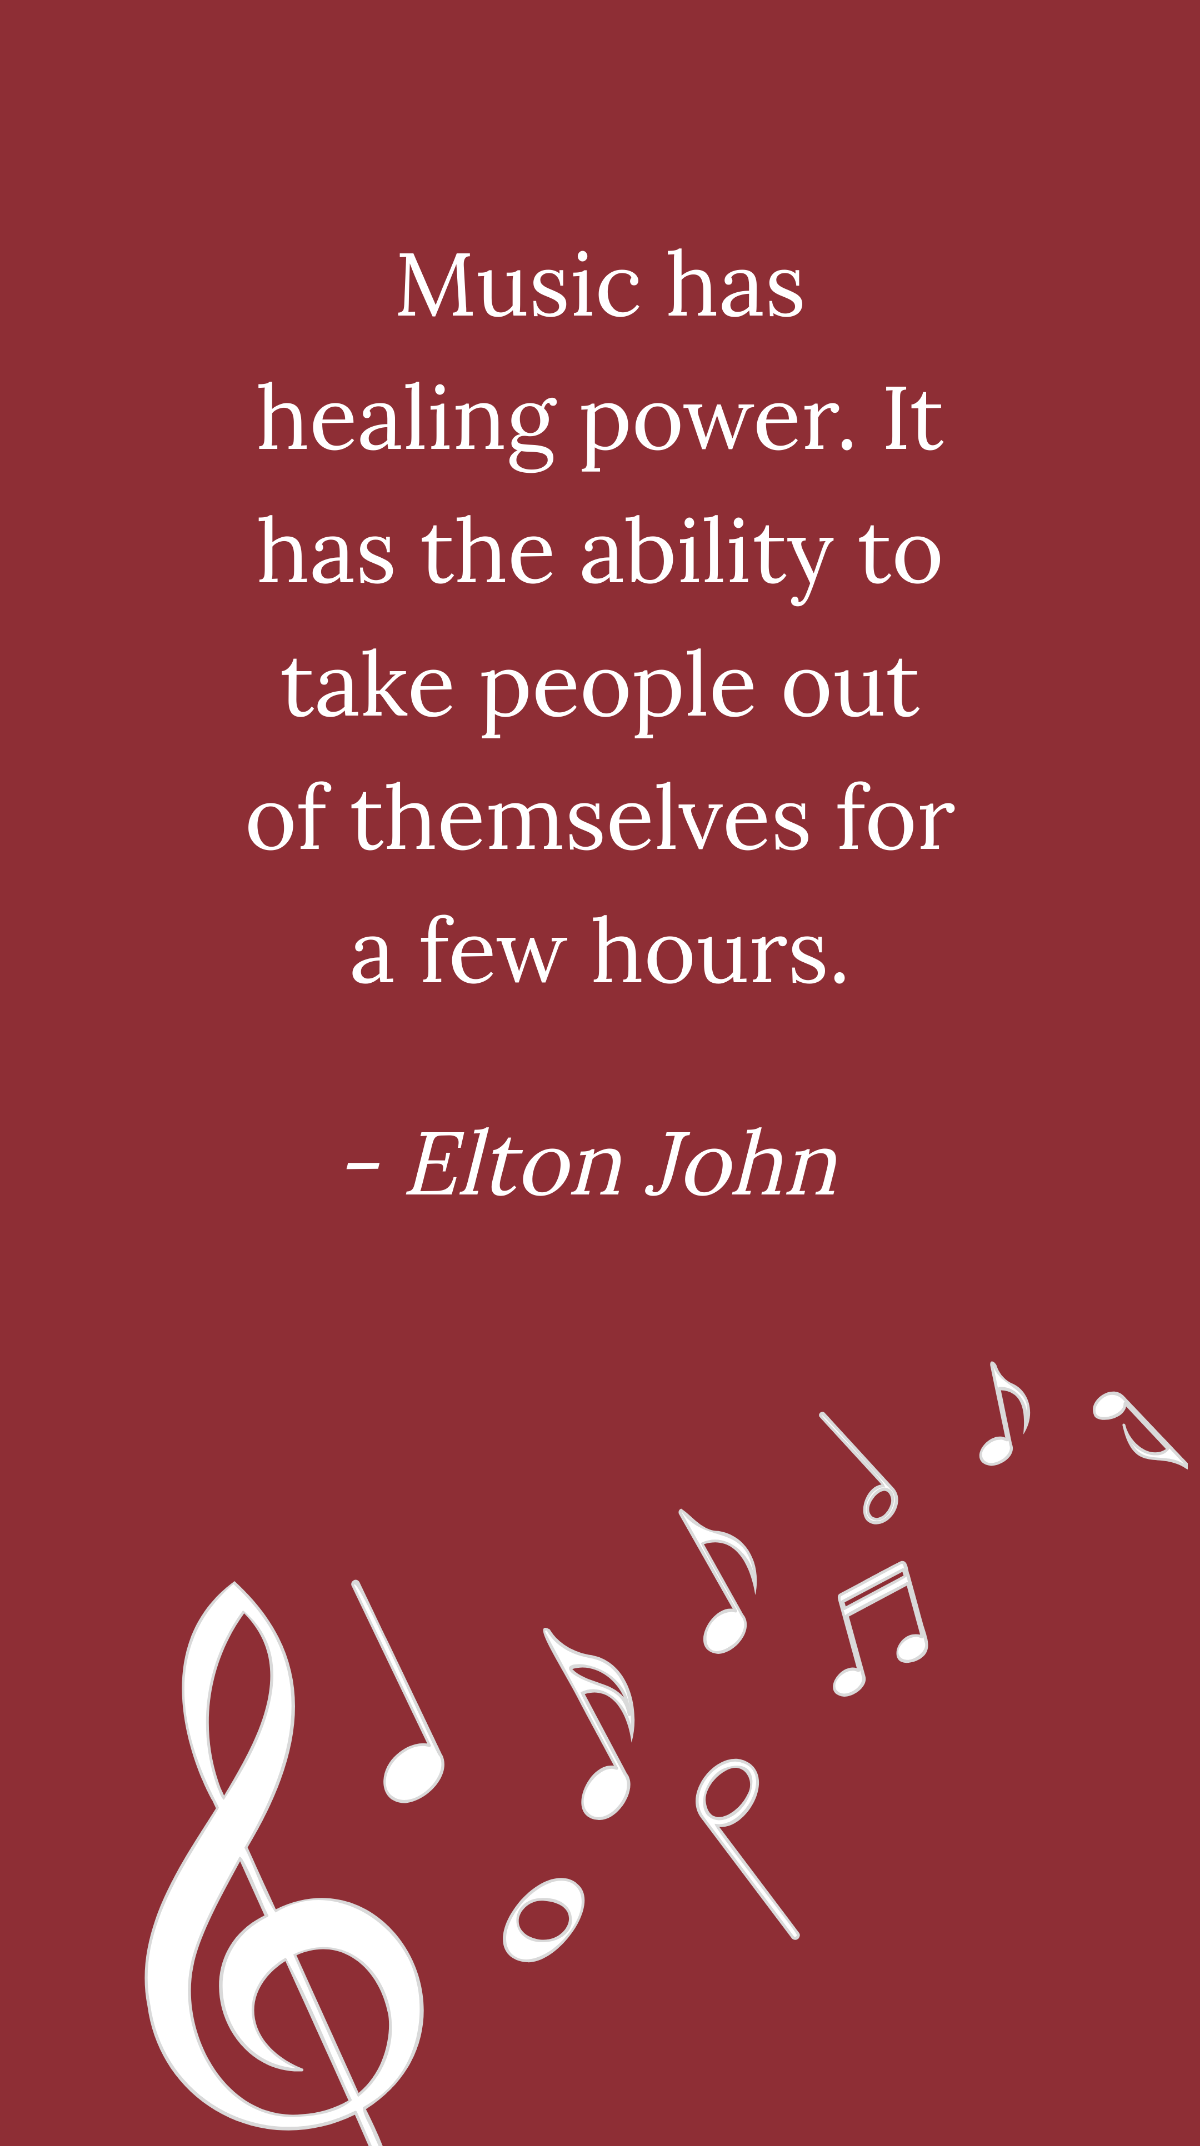 Elton John - Music has healing power. It has the ability to take people out of themselves for a few hours. Template